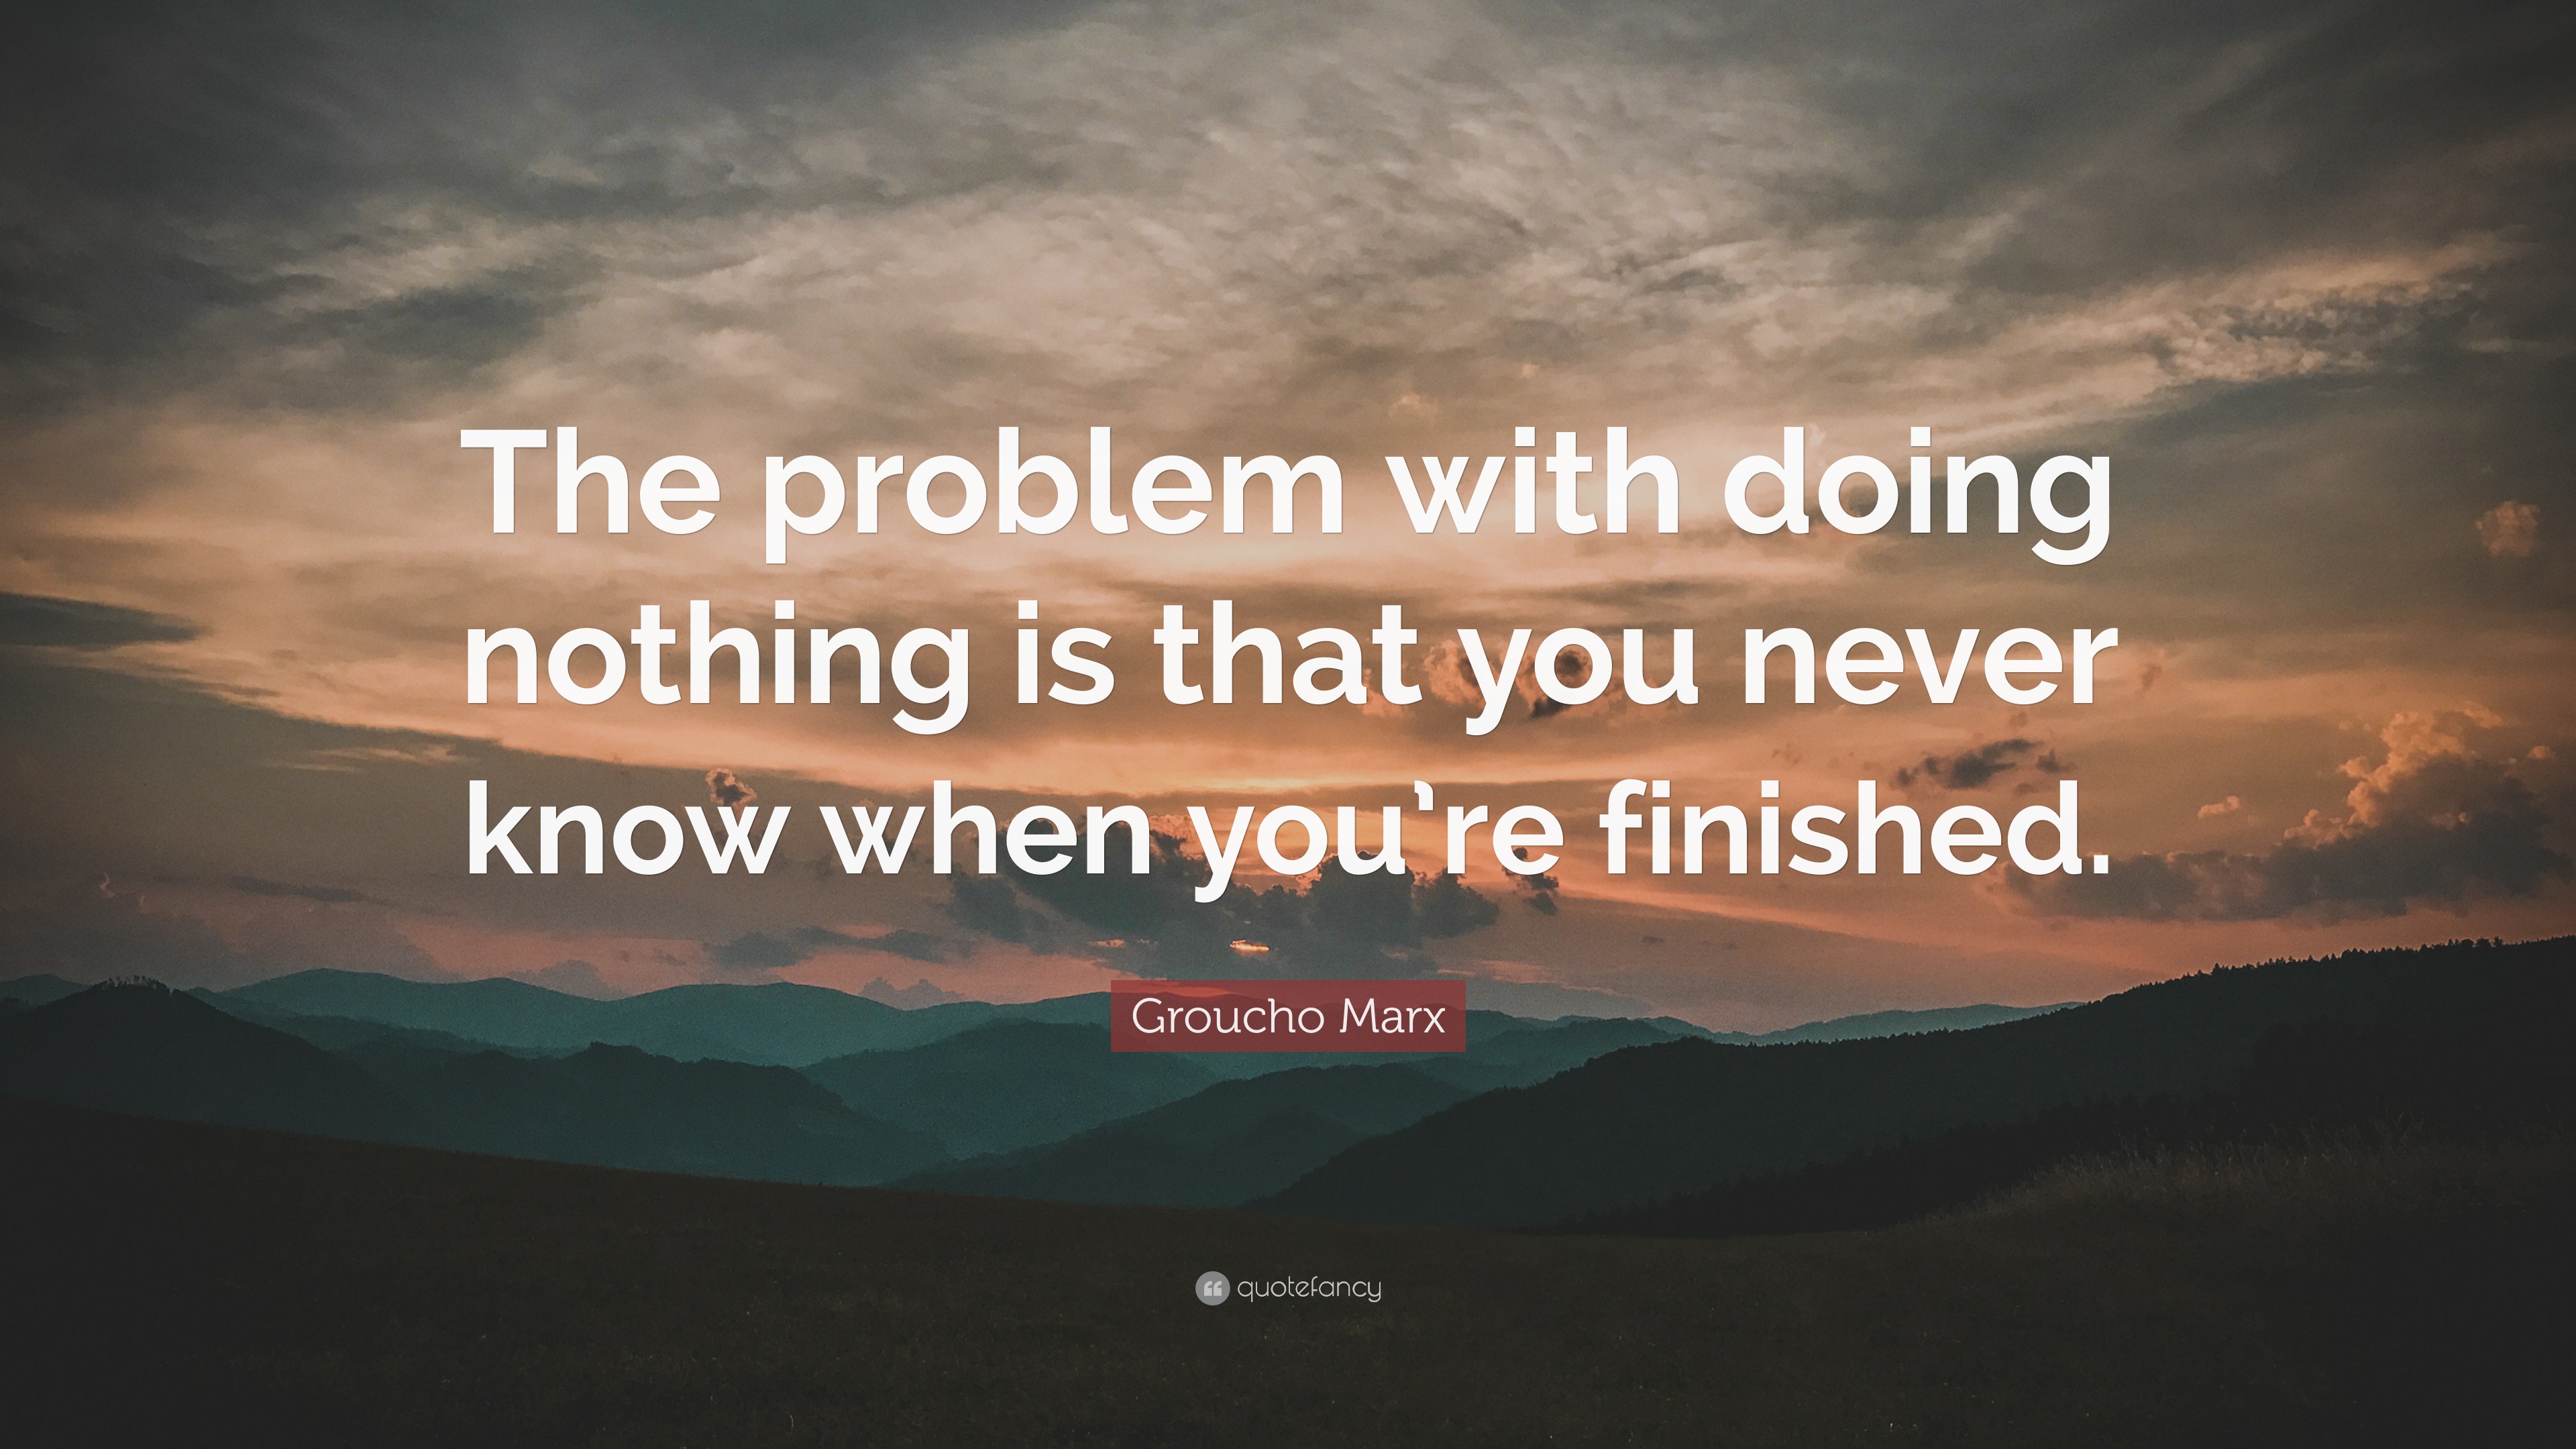 Groucho Marx Quote: “The problem with doing nothing is that you never ...